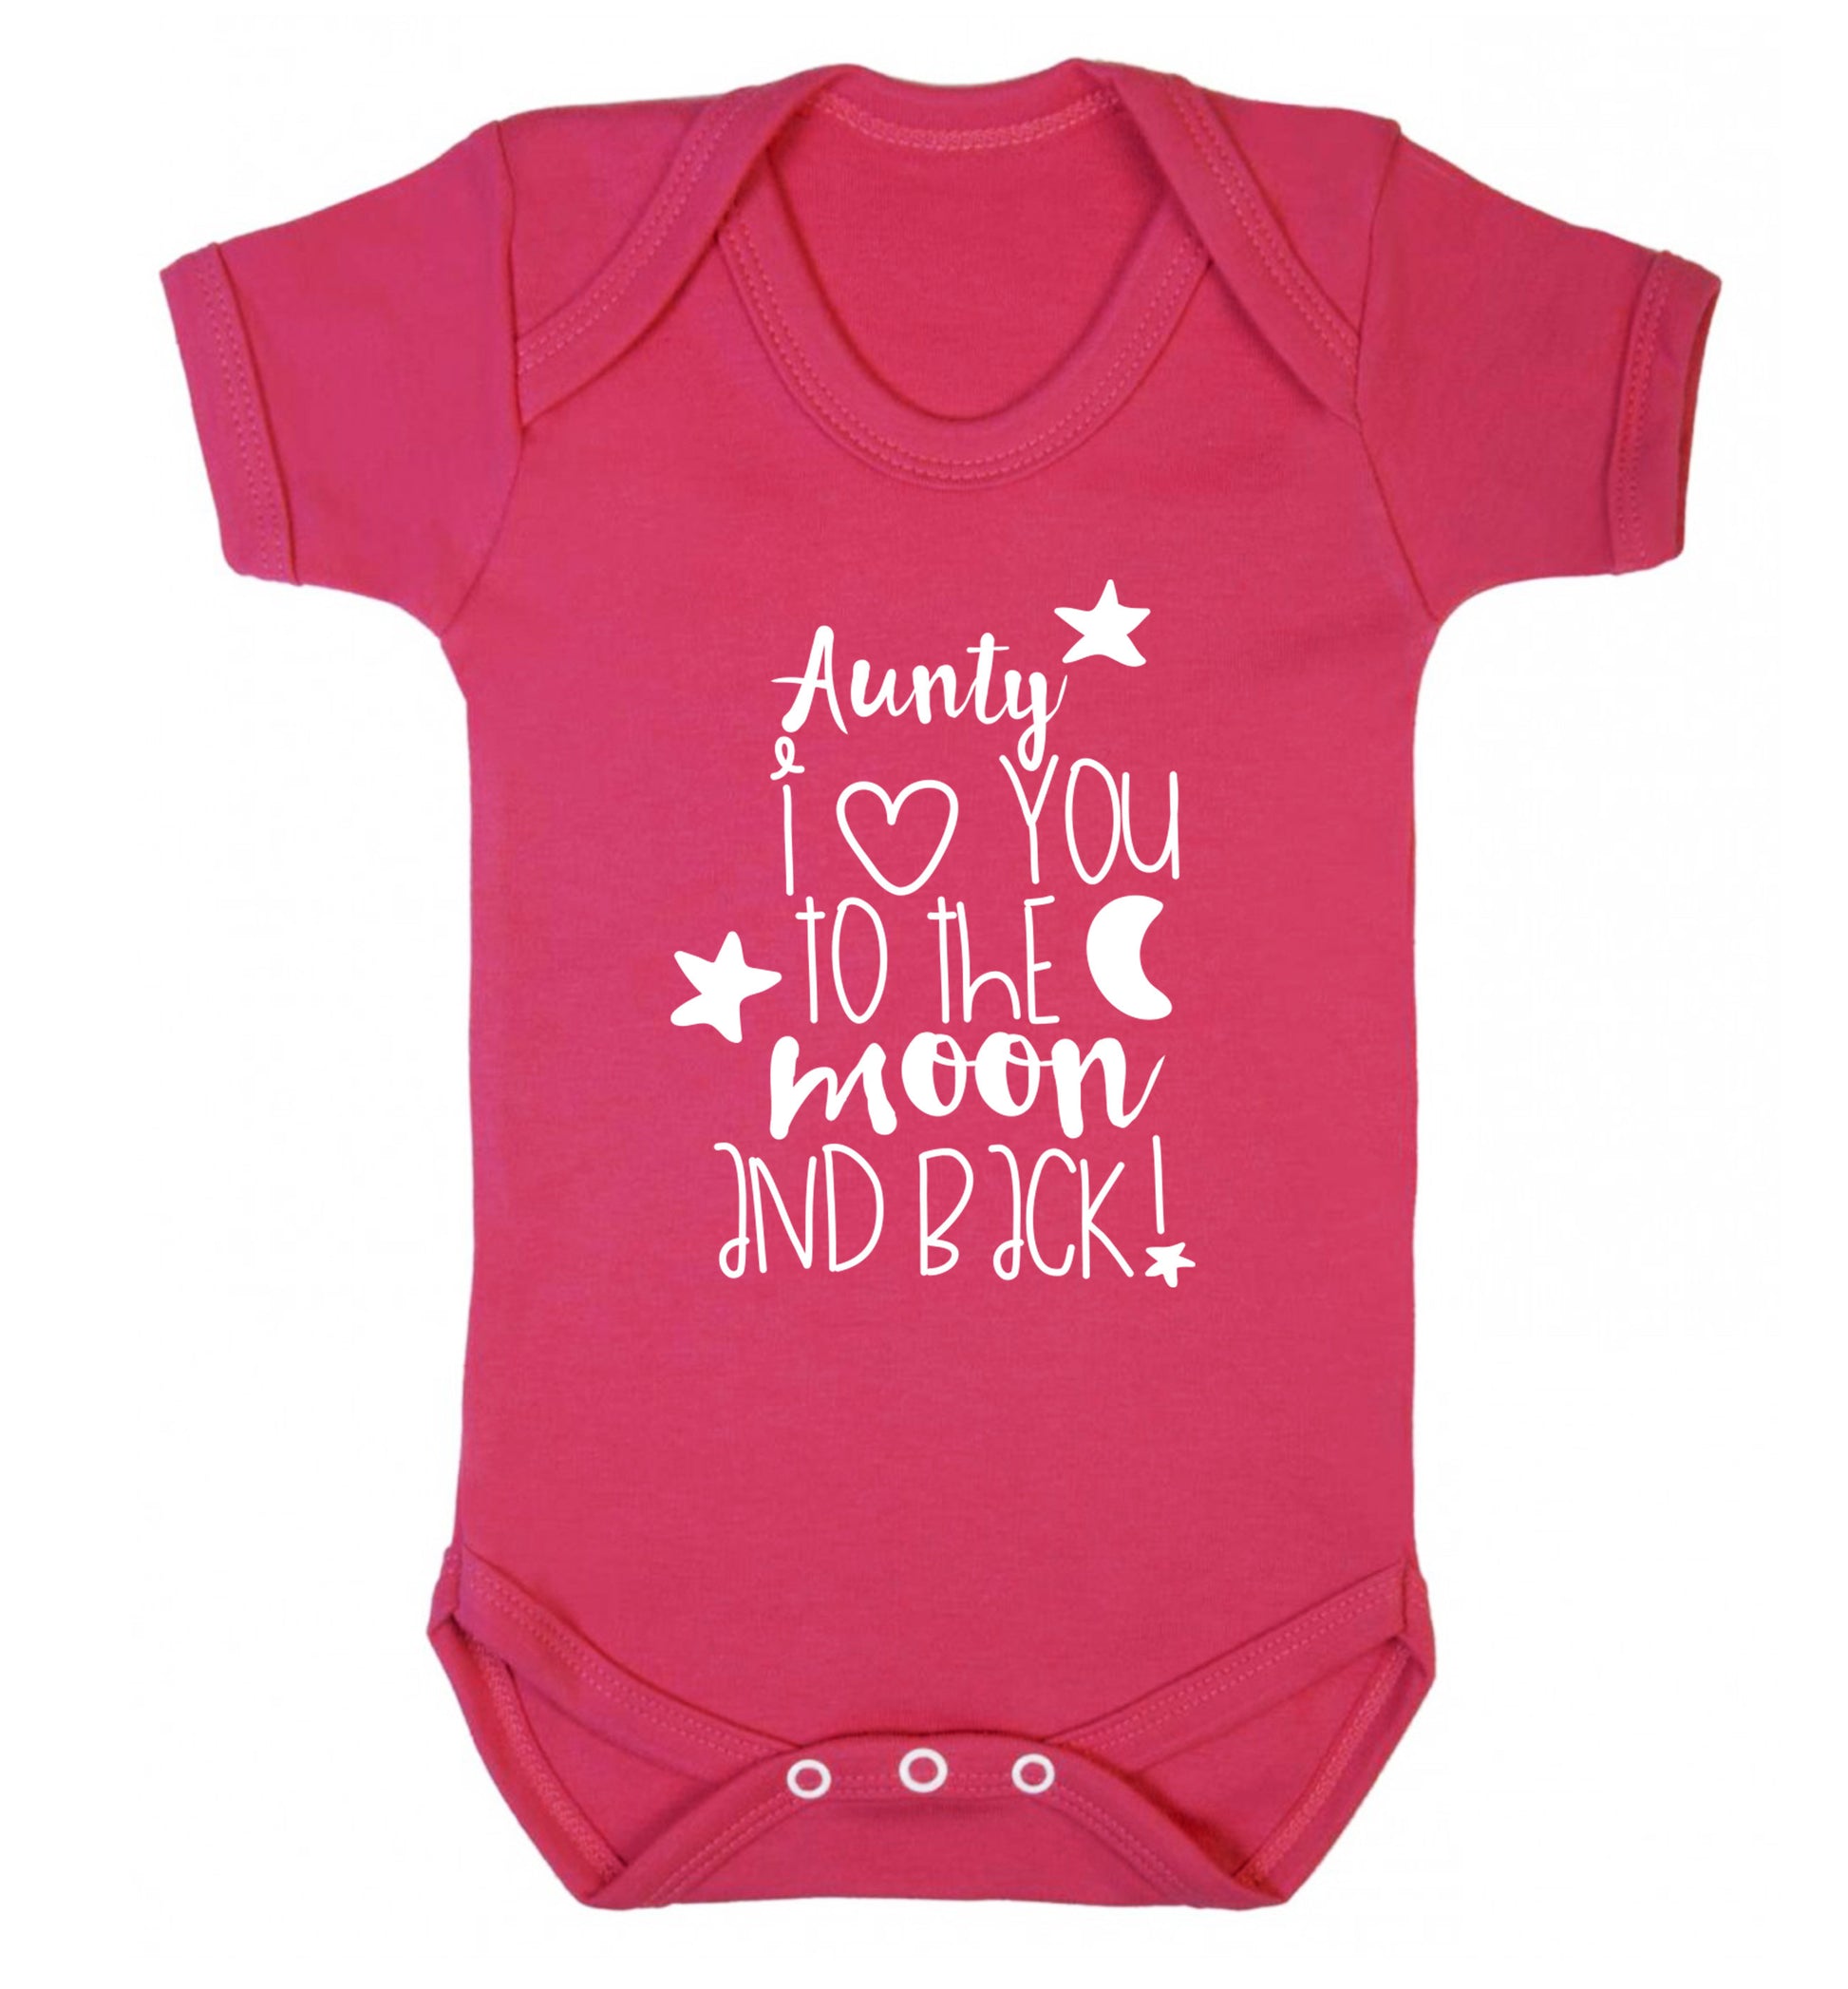 Aunty I love you to the moon and back Baby Vest dark pink 18-24 months